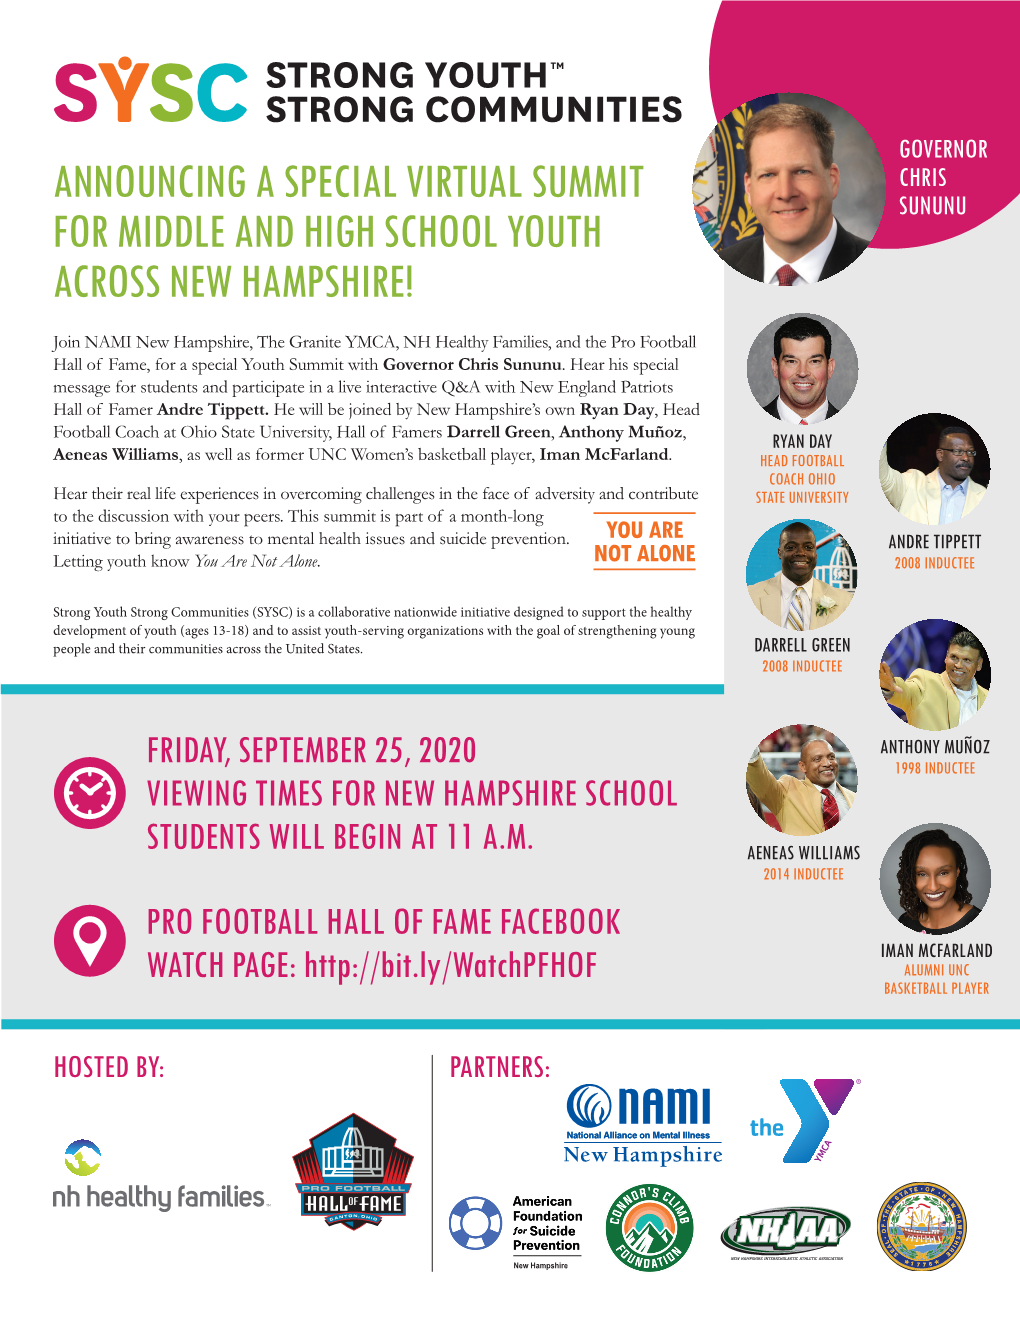 Announcing a Special Virtual Summit for Middle and High